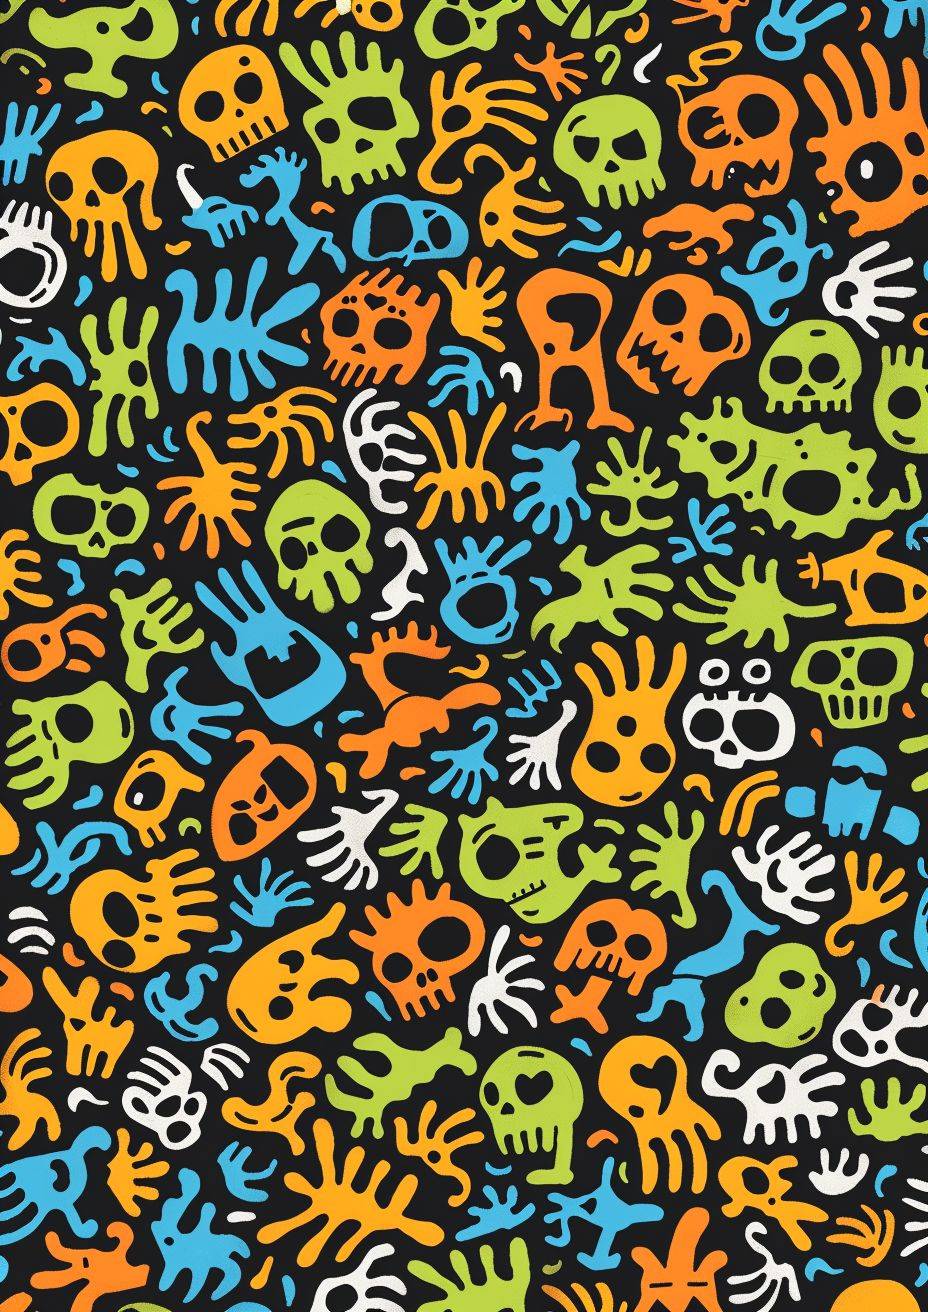 Keith Haring inspired colorful artwork of fun characters, colorful skulls and quirky ghosts